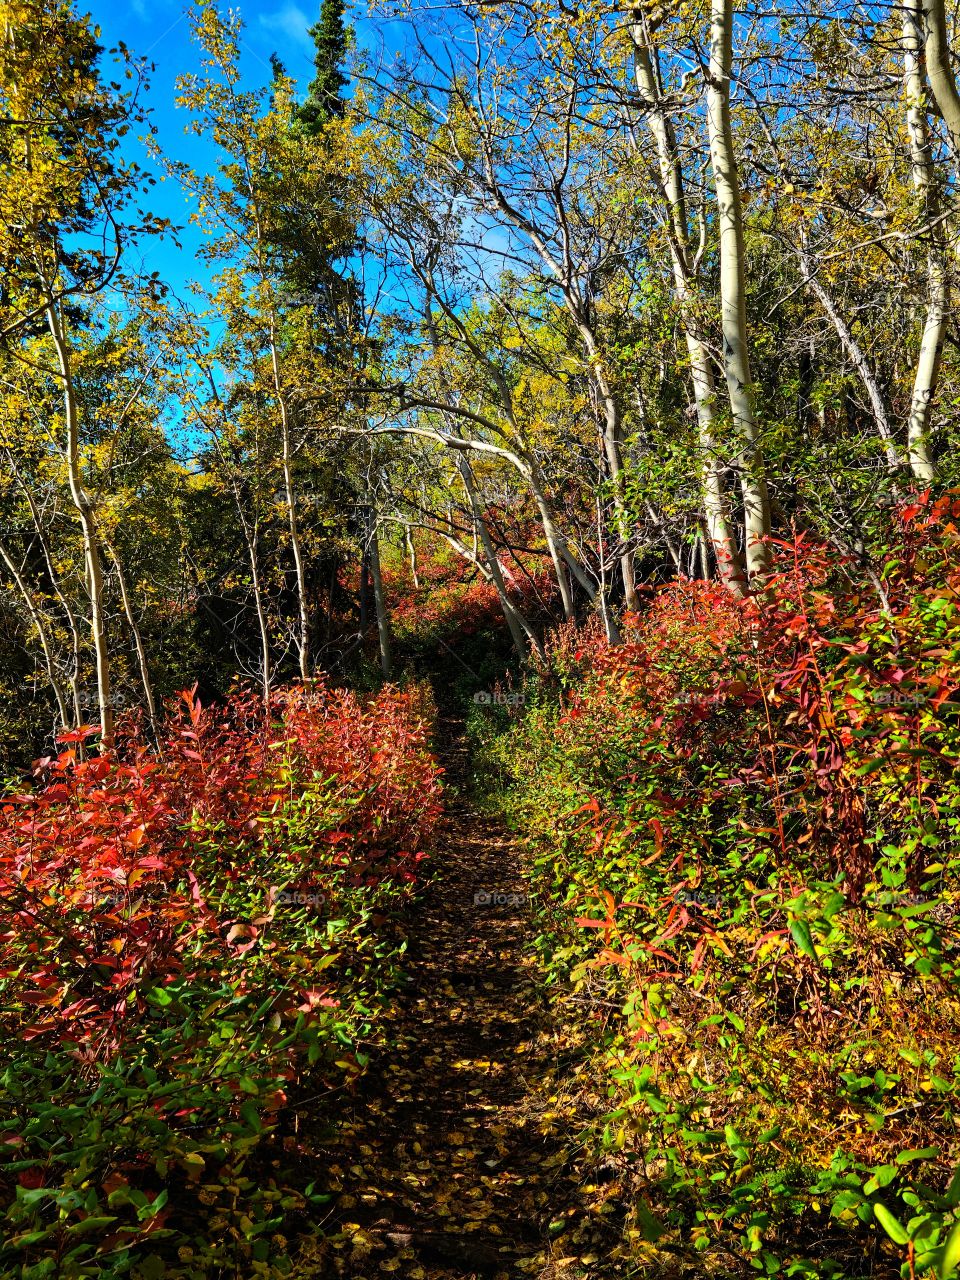 Colorful leaves along the hiking path in the forest